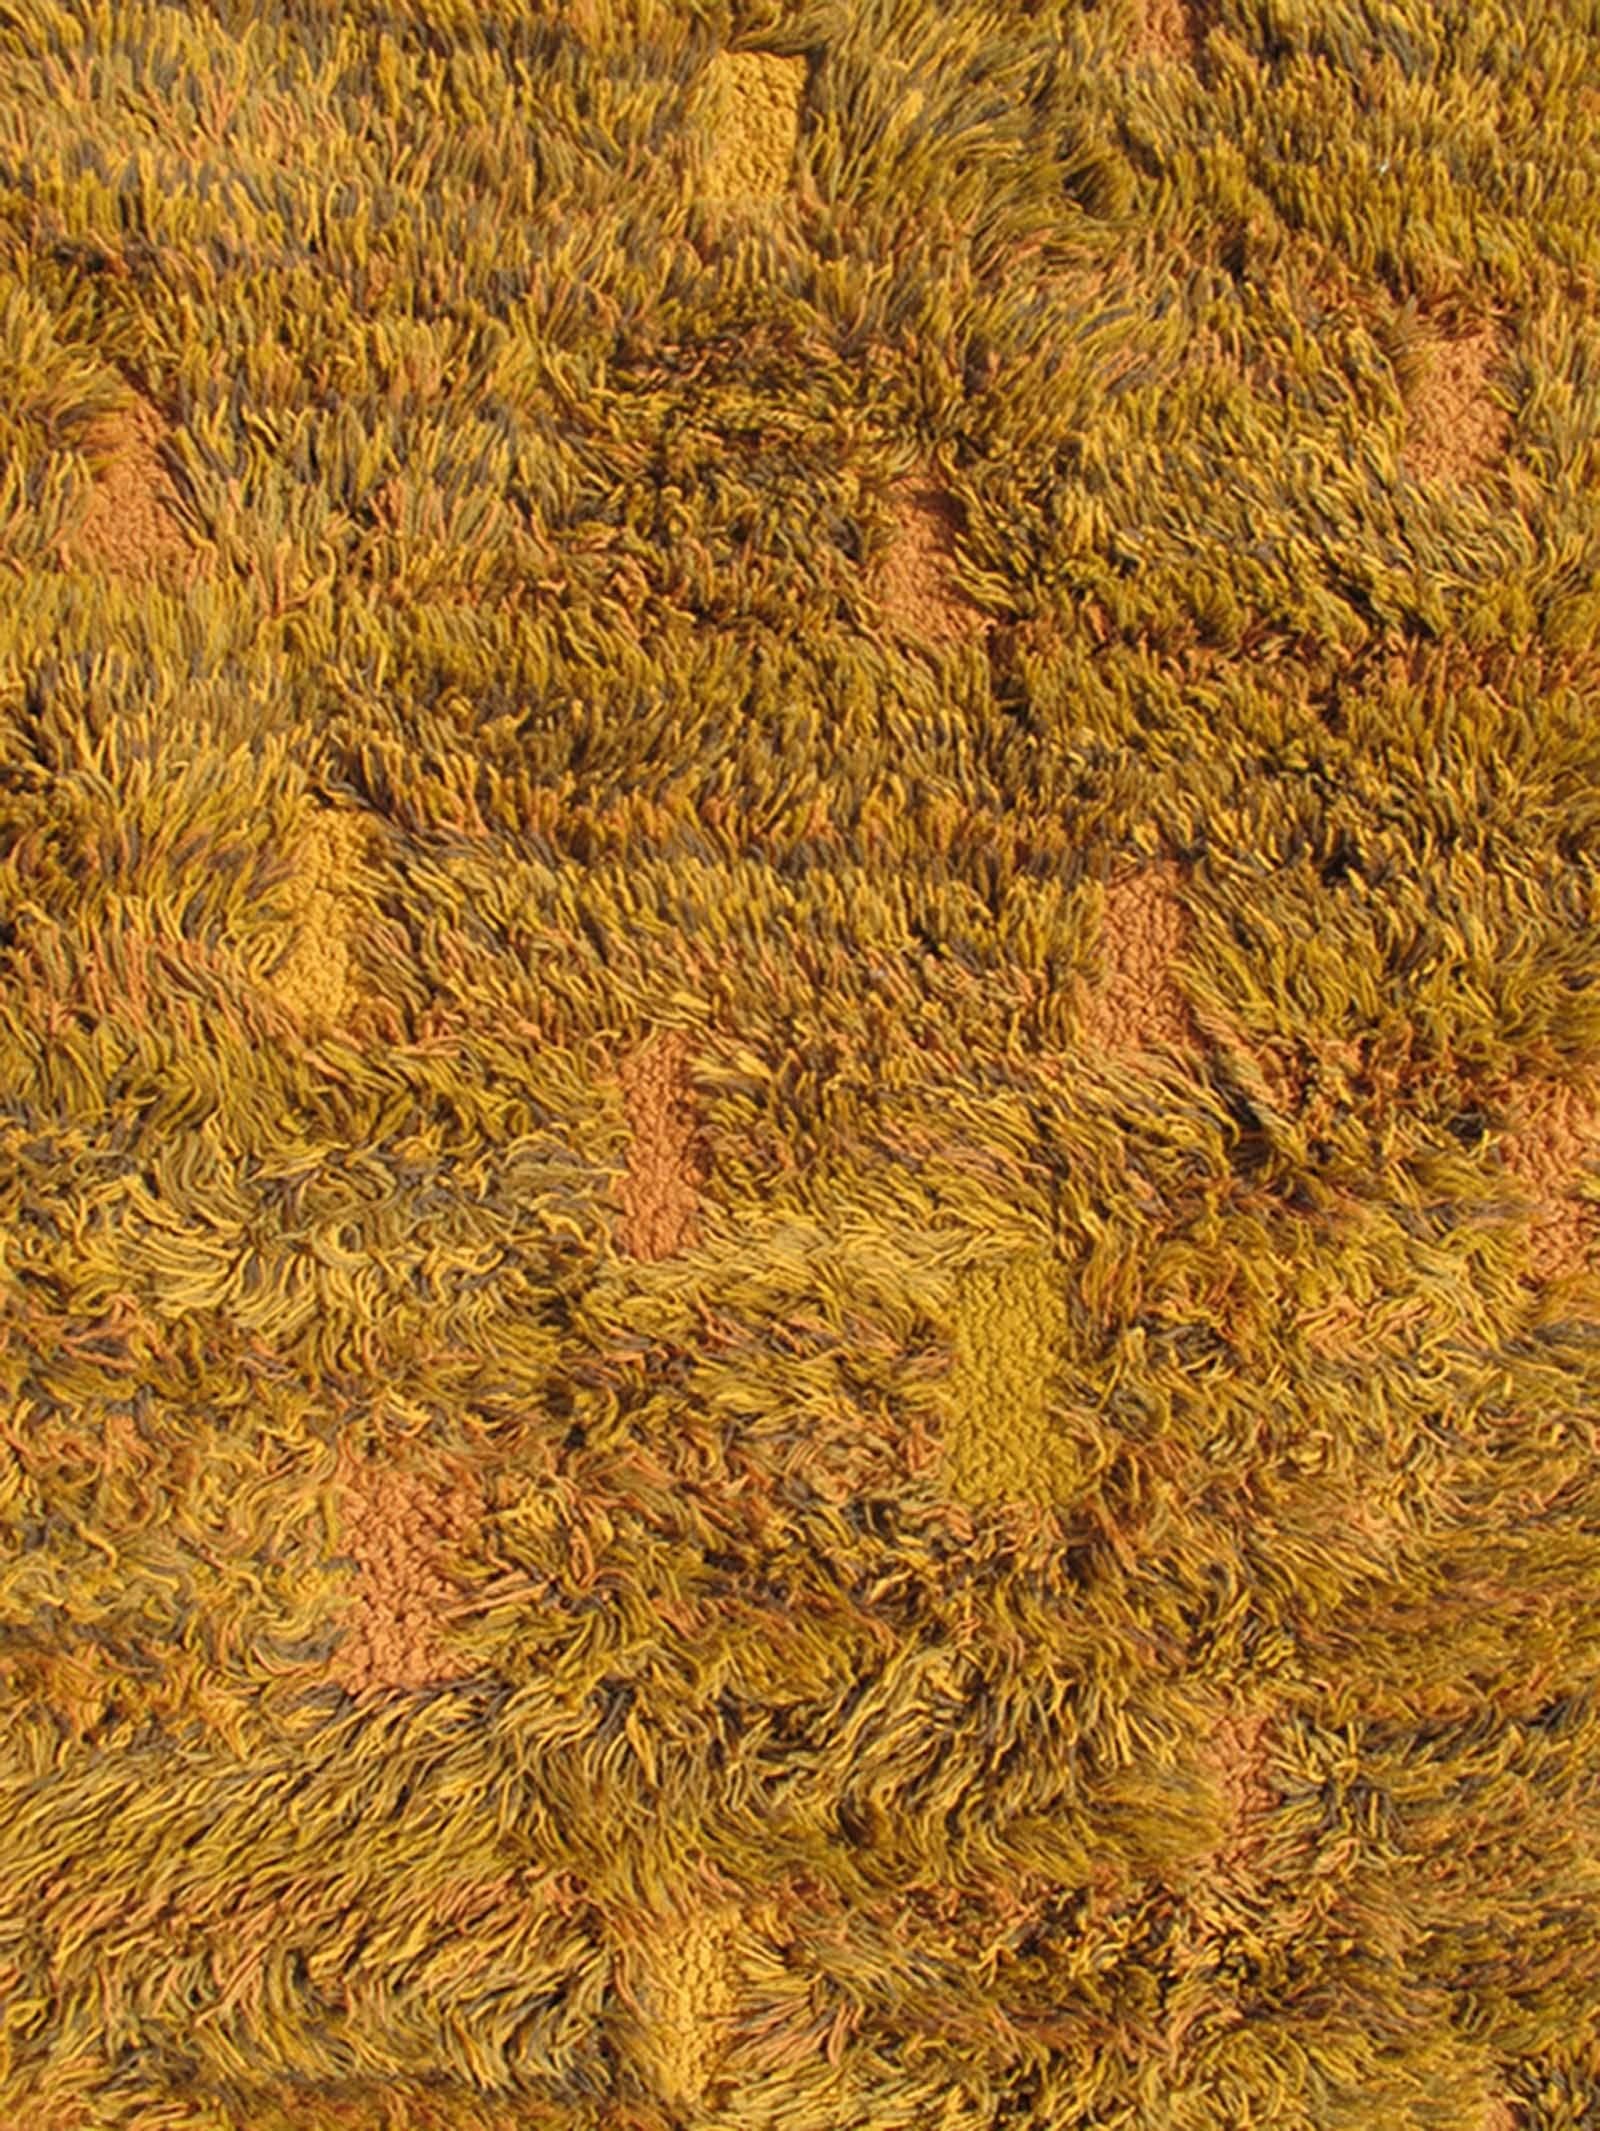 Vintage Modern Design rug with Shag Pile in burnt orange, brown and green tones.
This particular vintage rug features a beautiful blended modern design, inspired by nature in conjunction with an array of s wheat tones with brown and orange